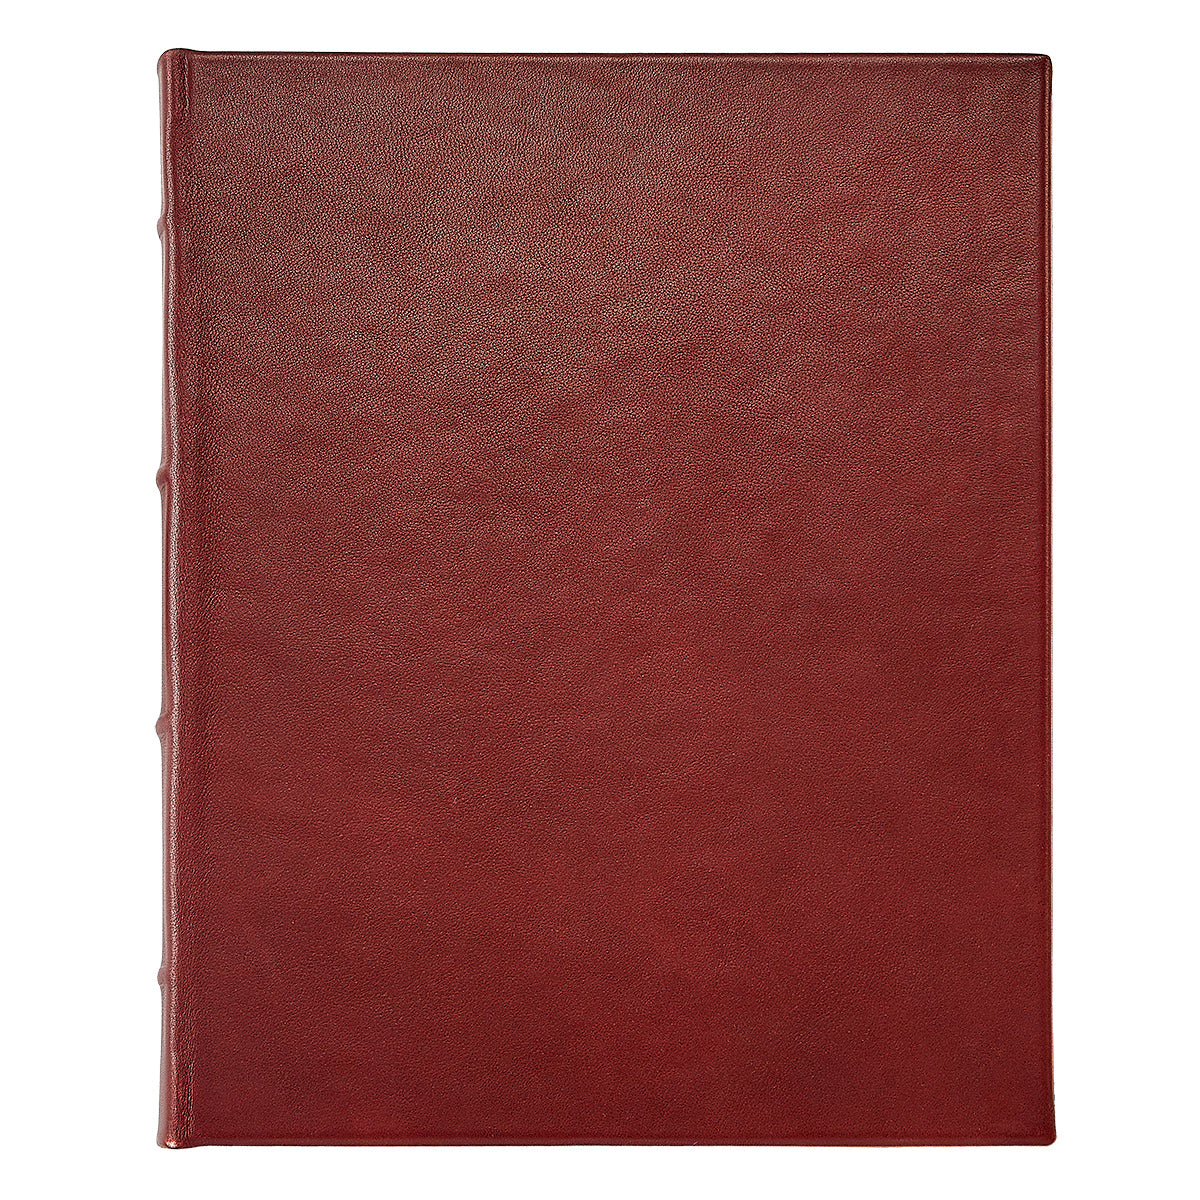 Graphic Image 11 Hardcover Unlined Manuscript Burgundy Traditional Leather